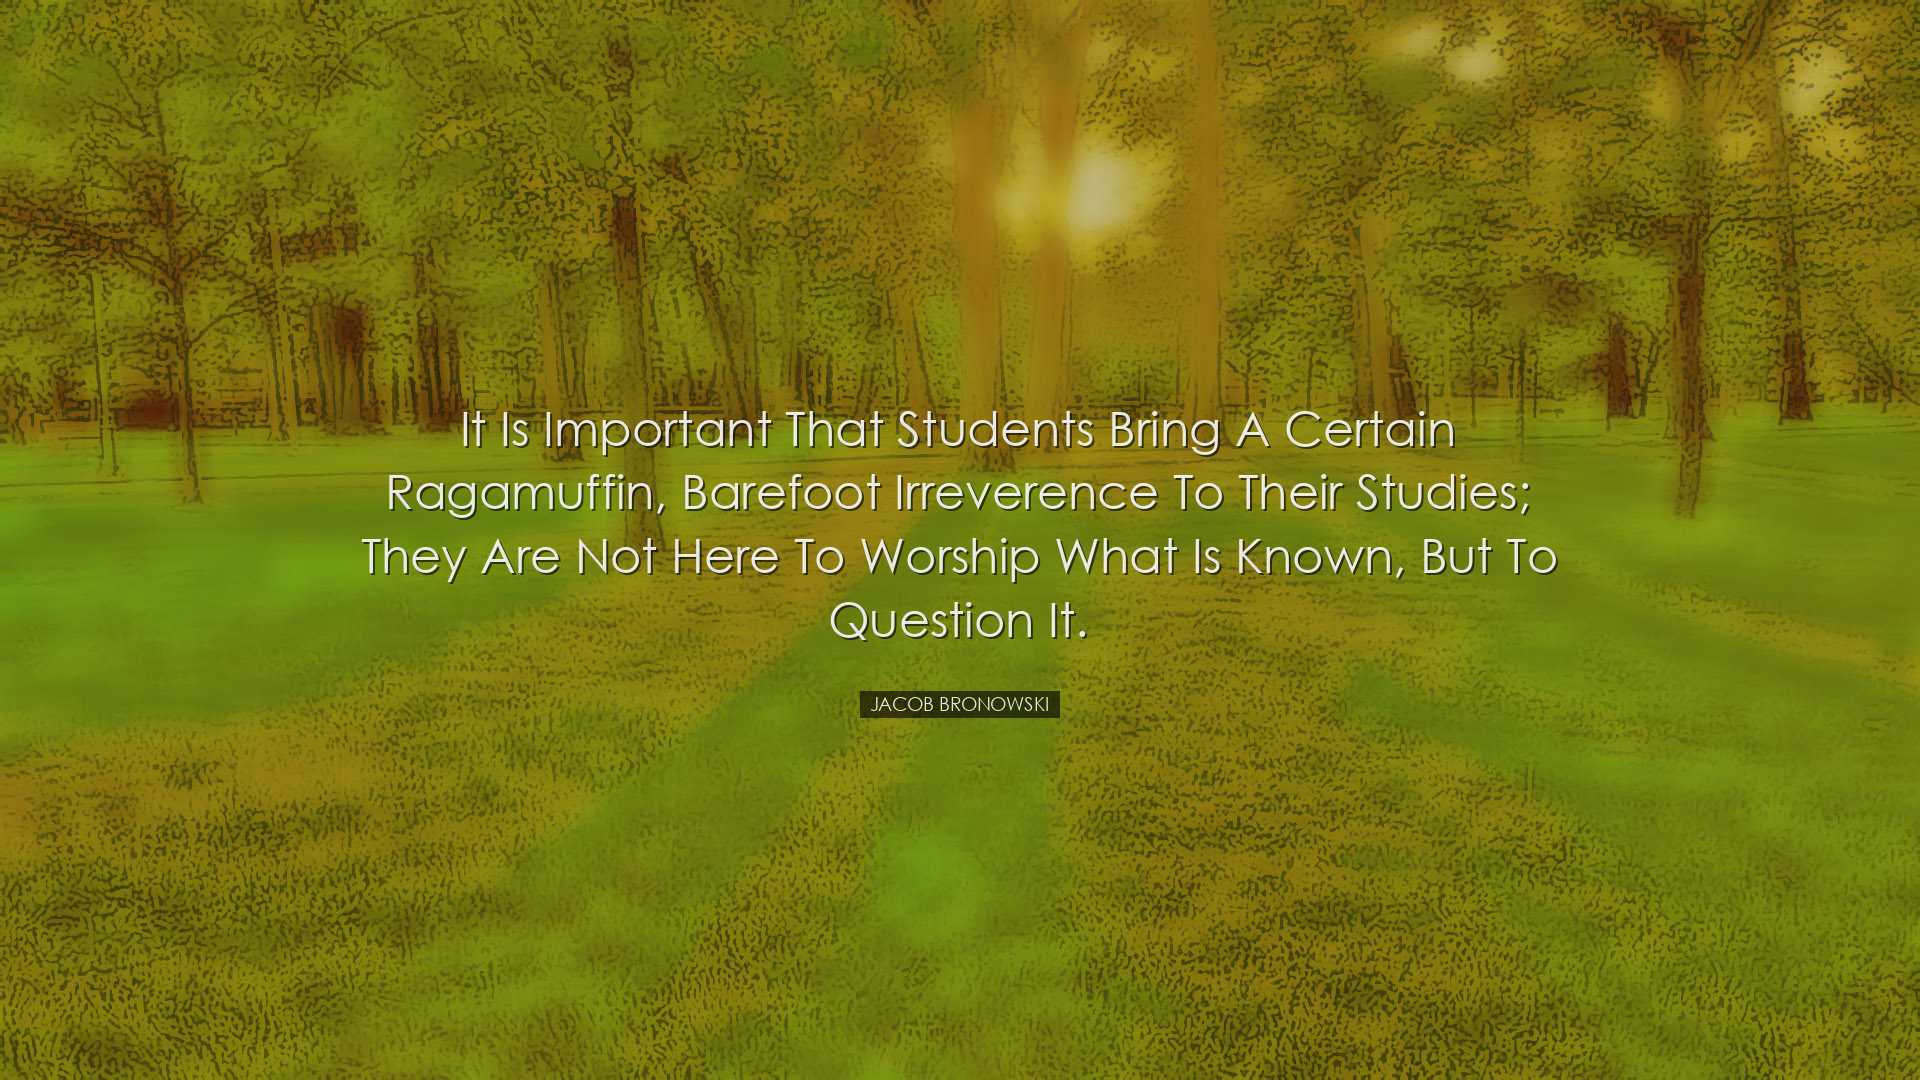 It is important that students bring a certain ragamuffin, barefoot